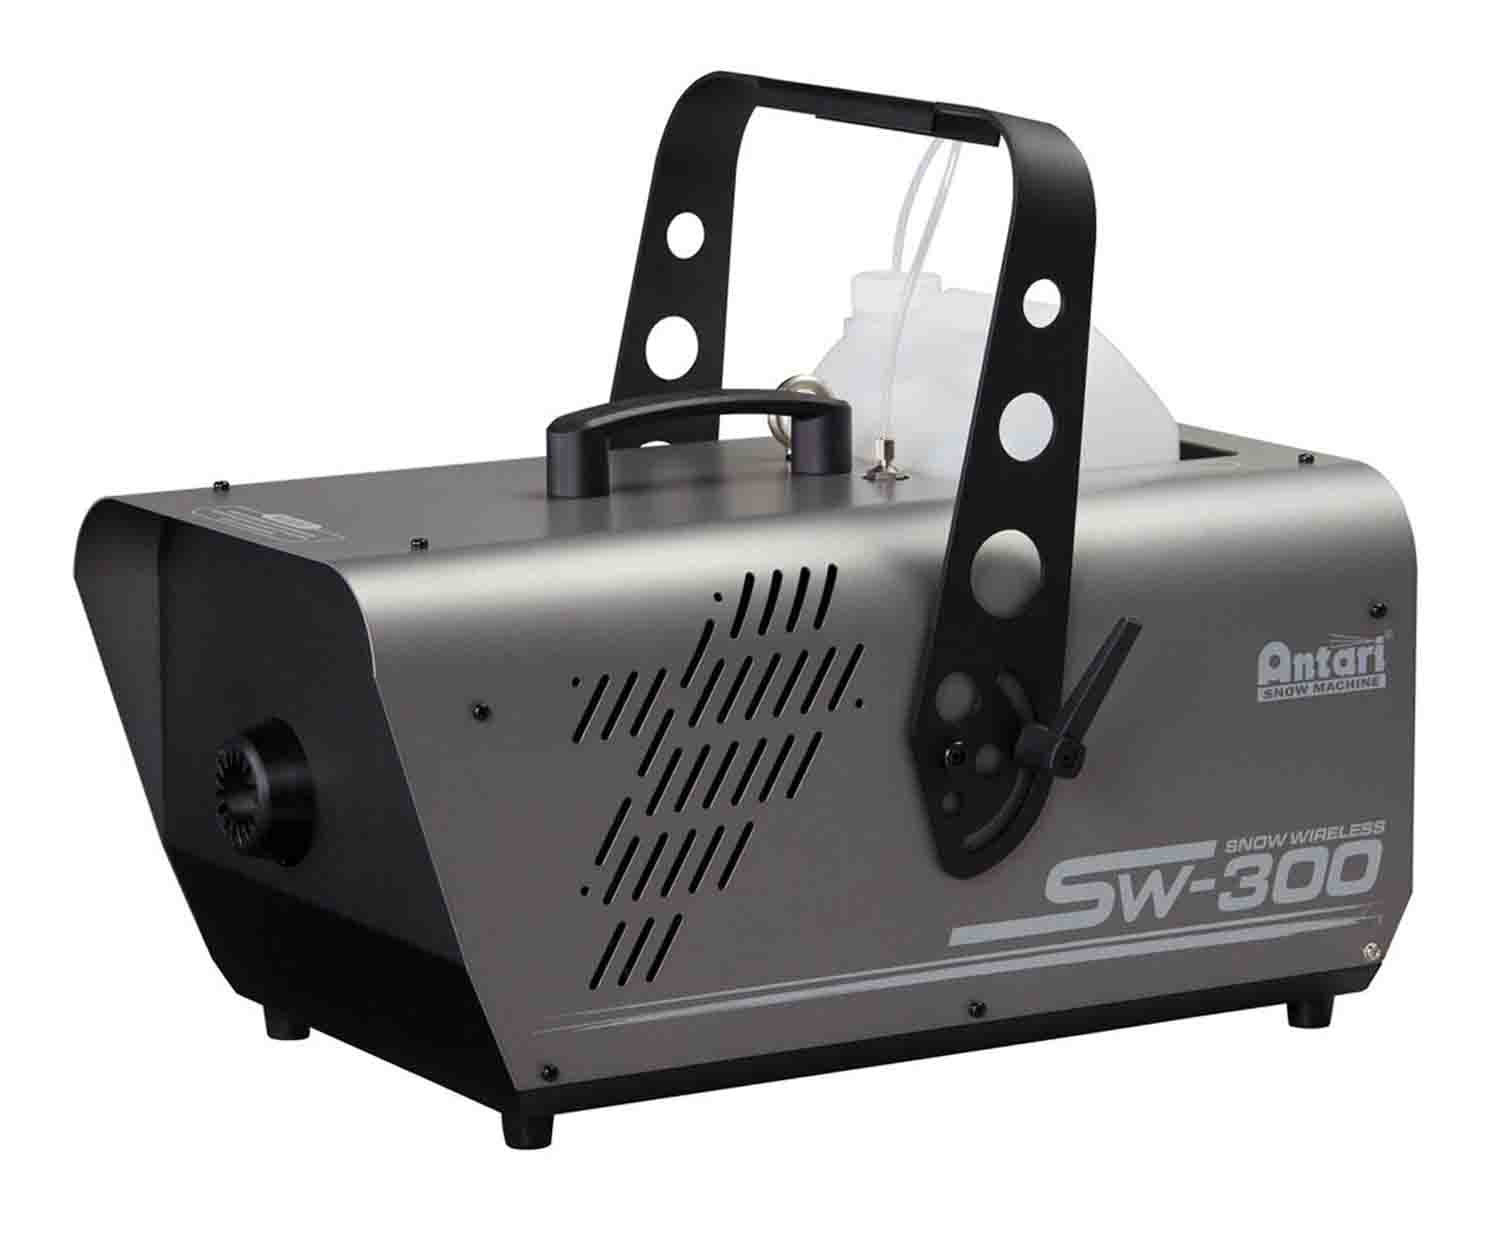 Antari SW-300 High Output Long Throw Snow Machine with Patented Nozzle Delivery System - Hollywood DJ